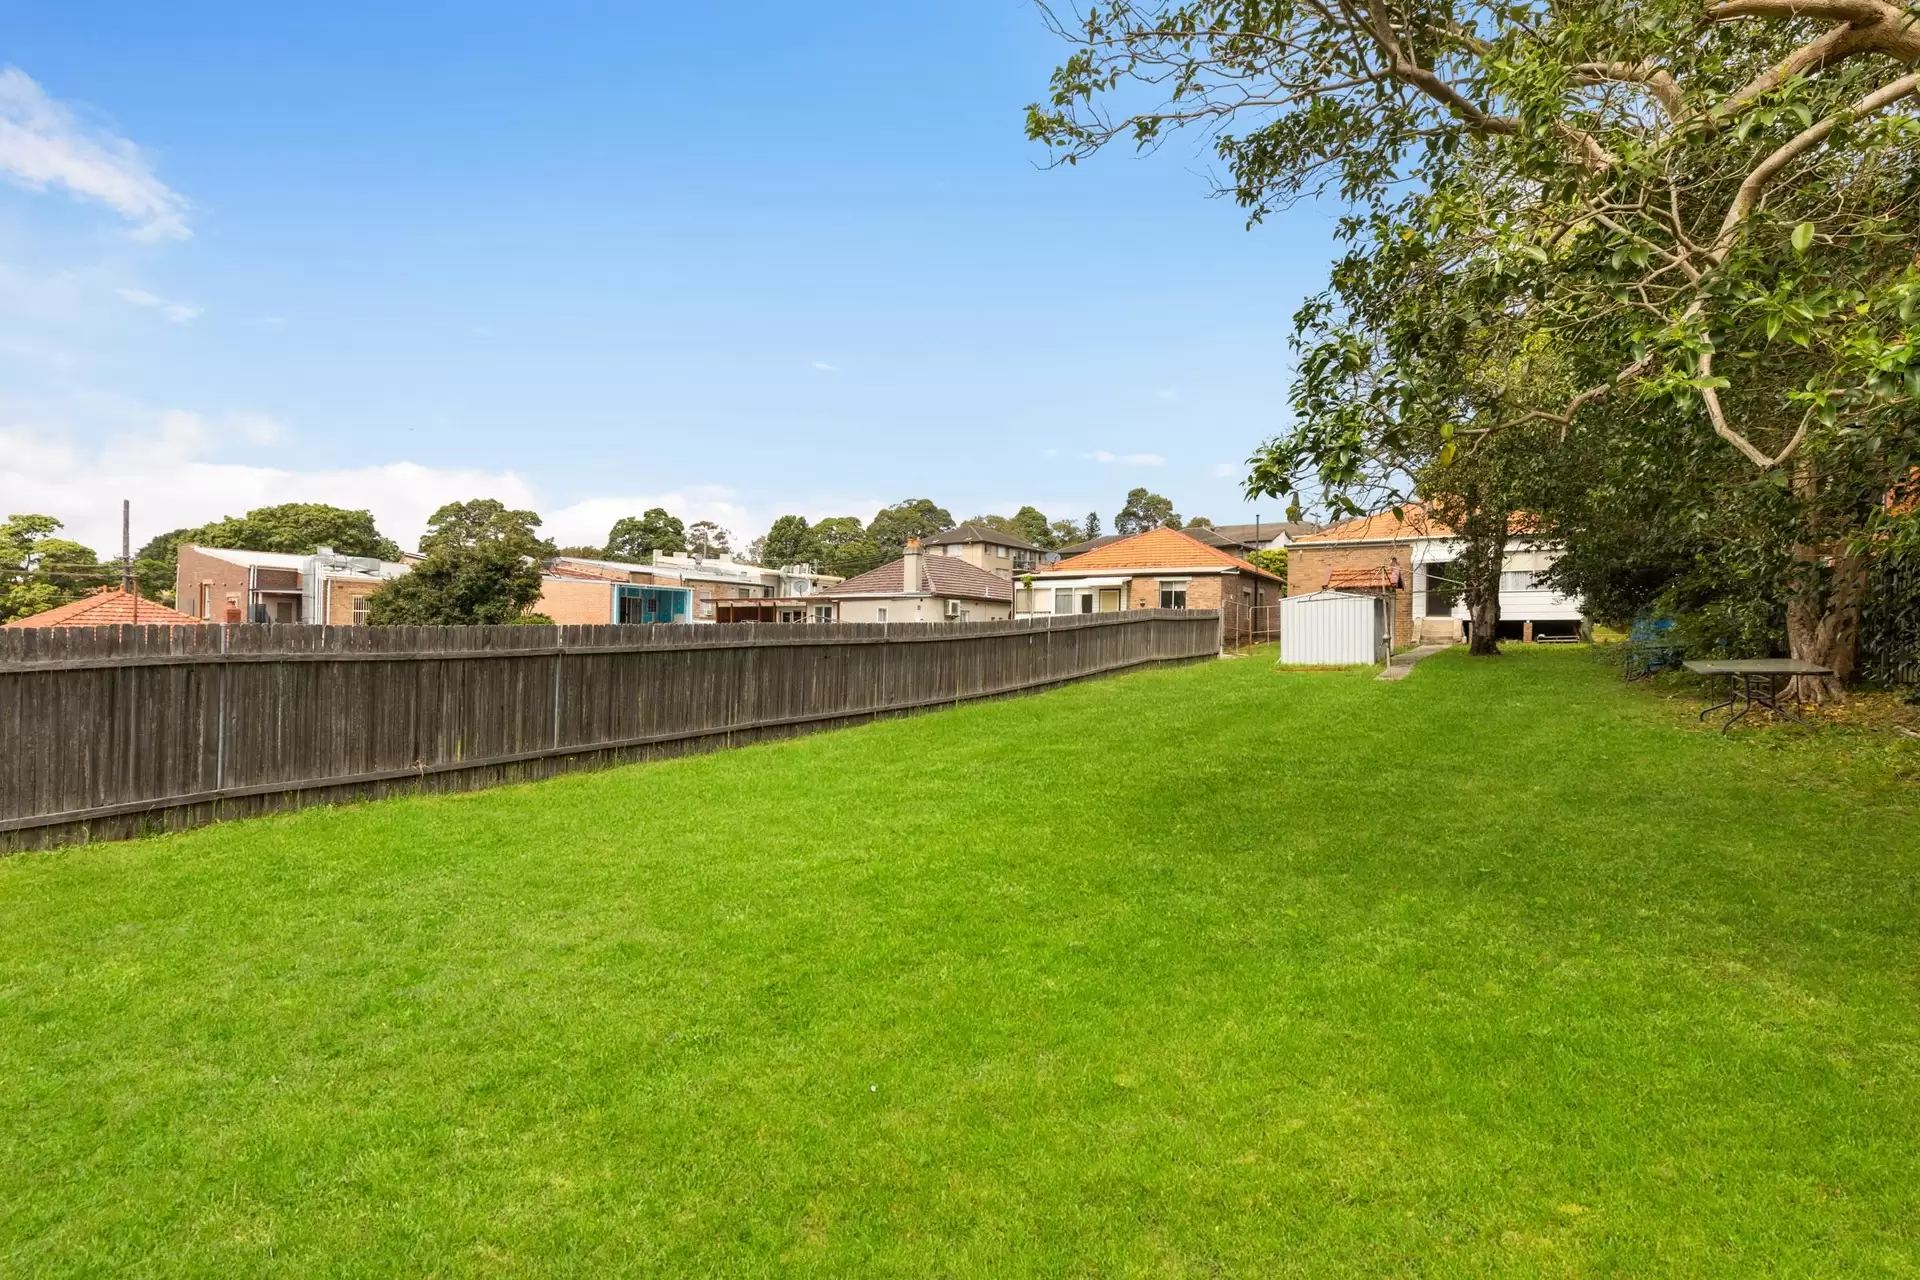 7 Harvard Street, Gladesville For Lease by Cassidy Real Estate - image 1